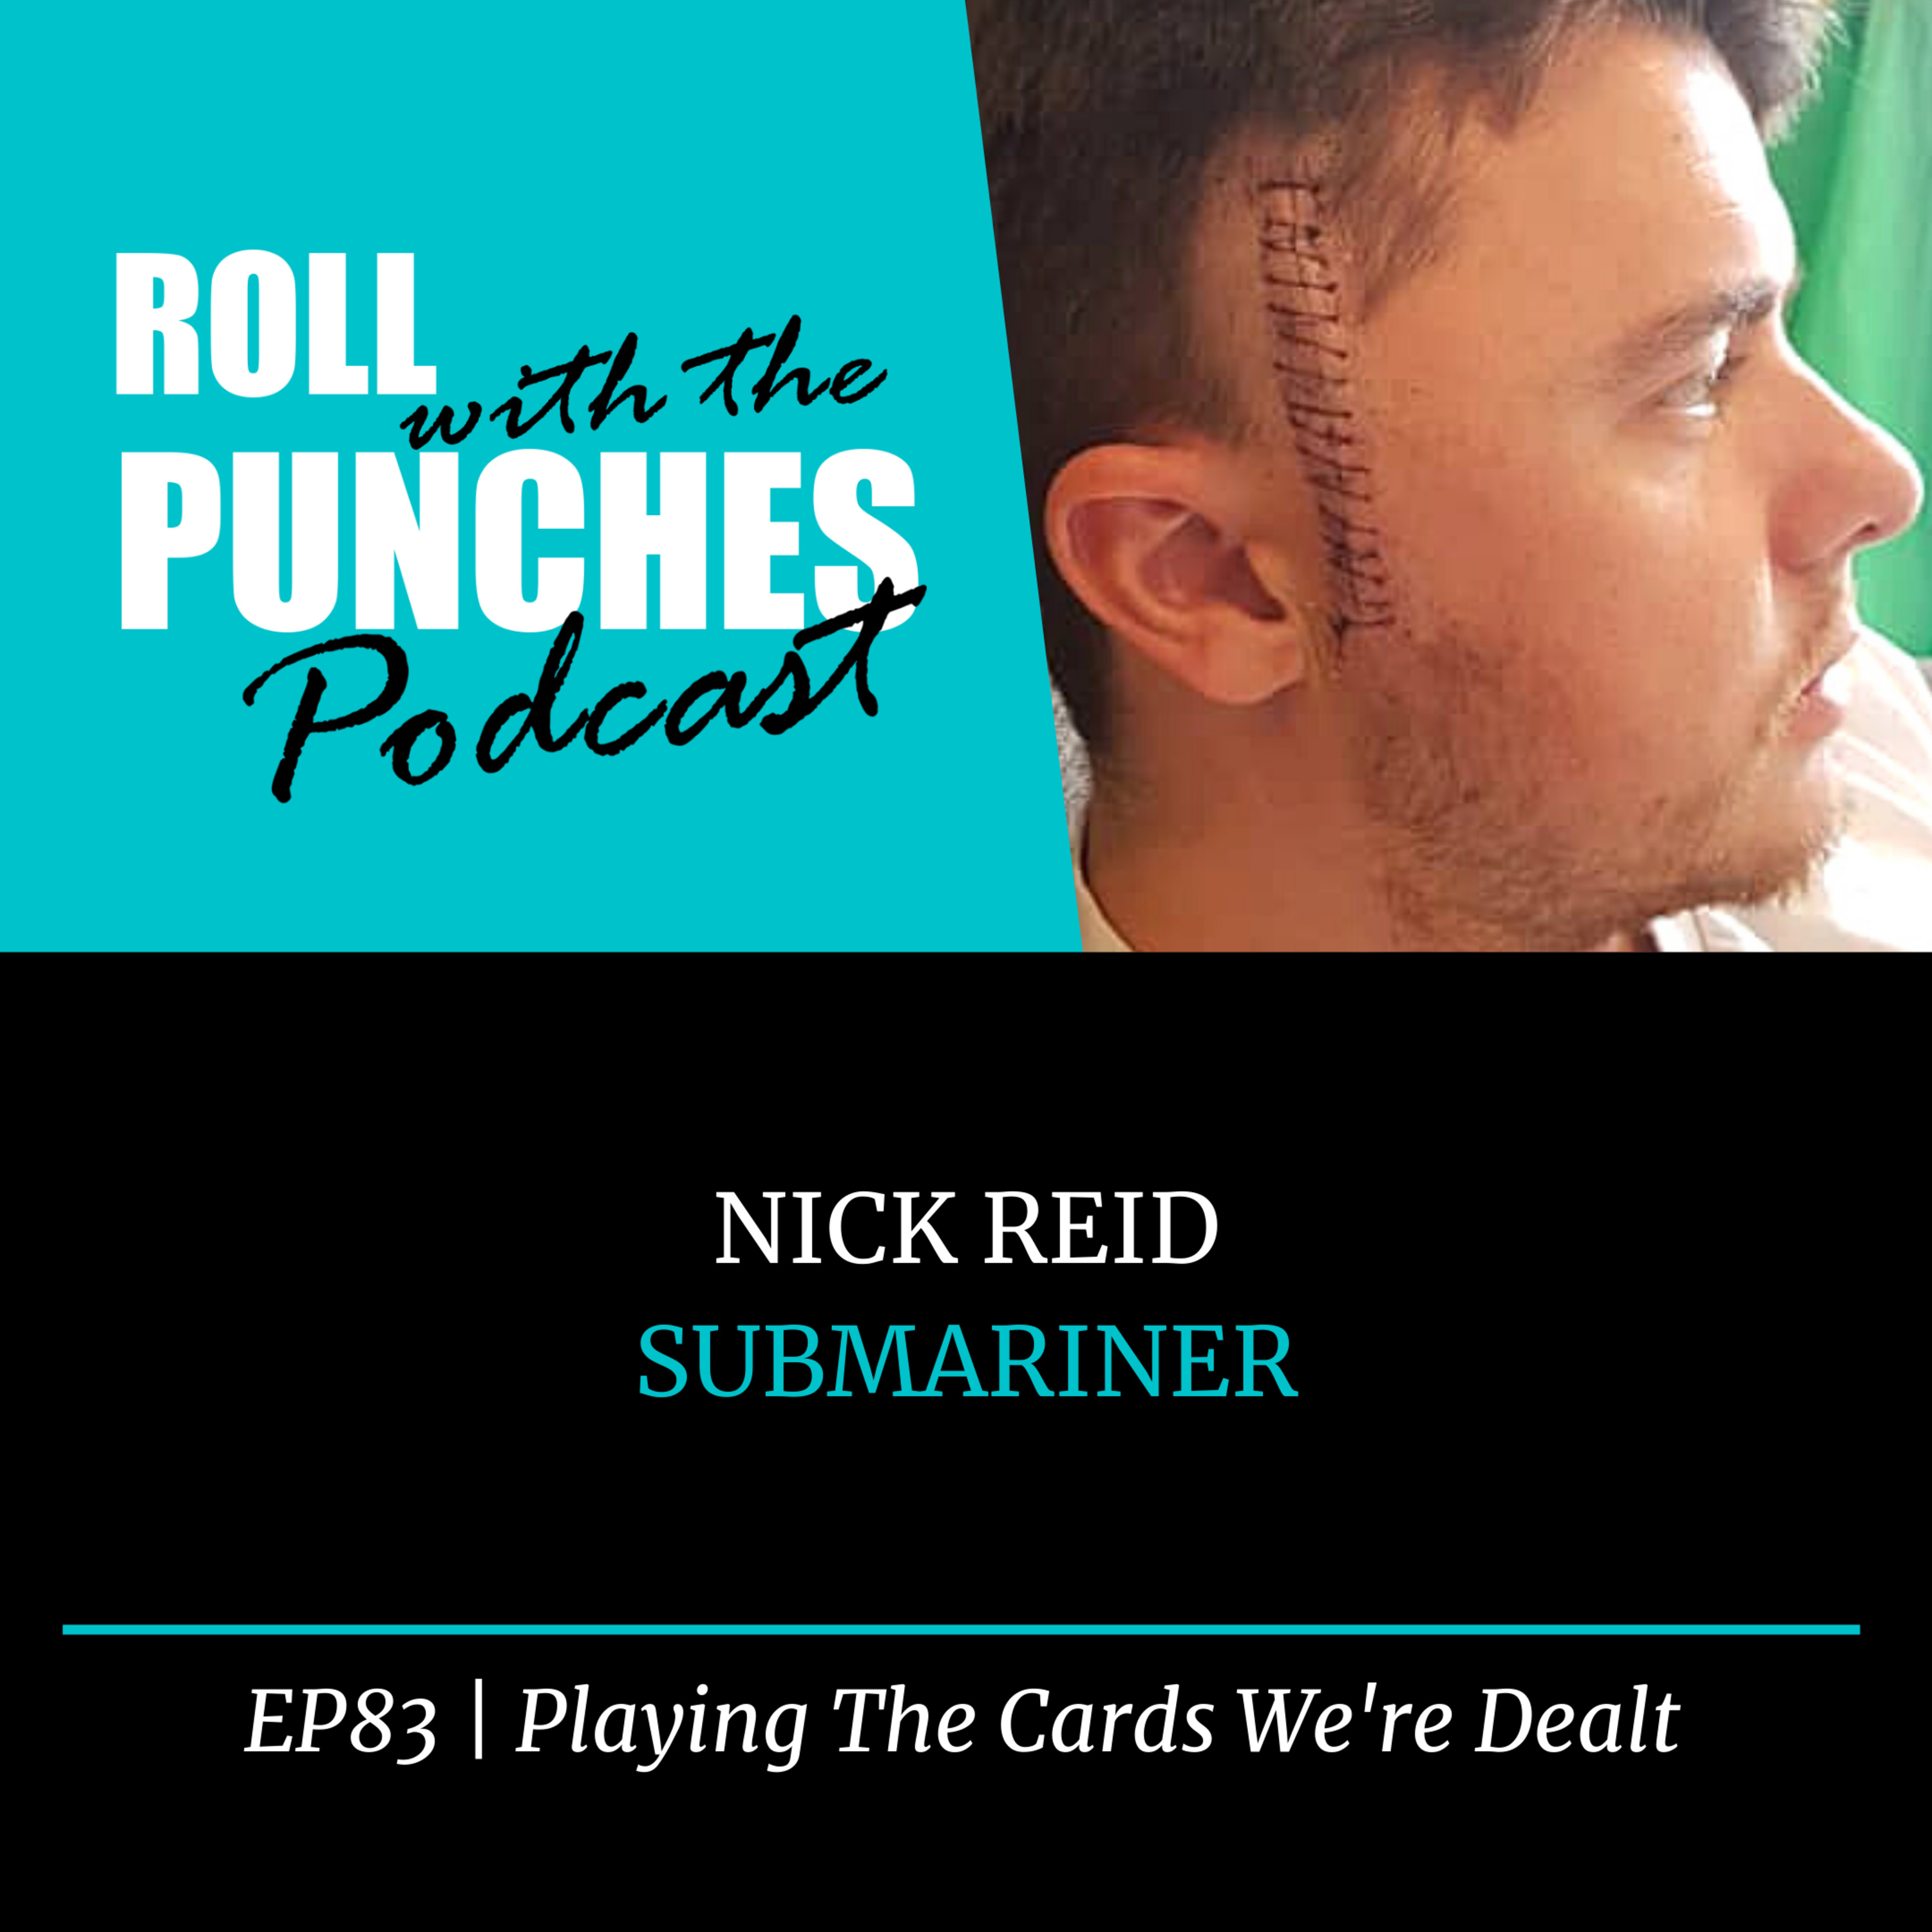 EP83 Playing The Cards We're Dealt | Nick Reid